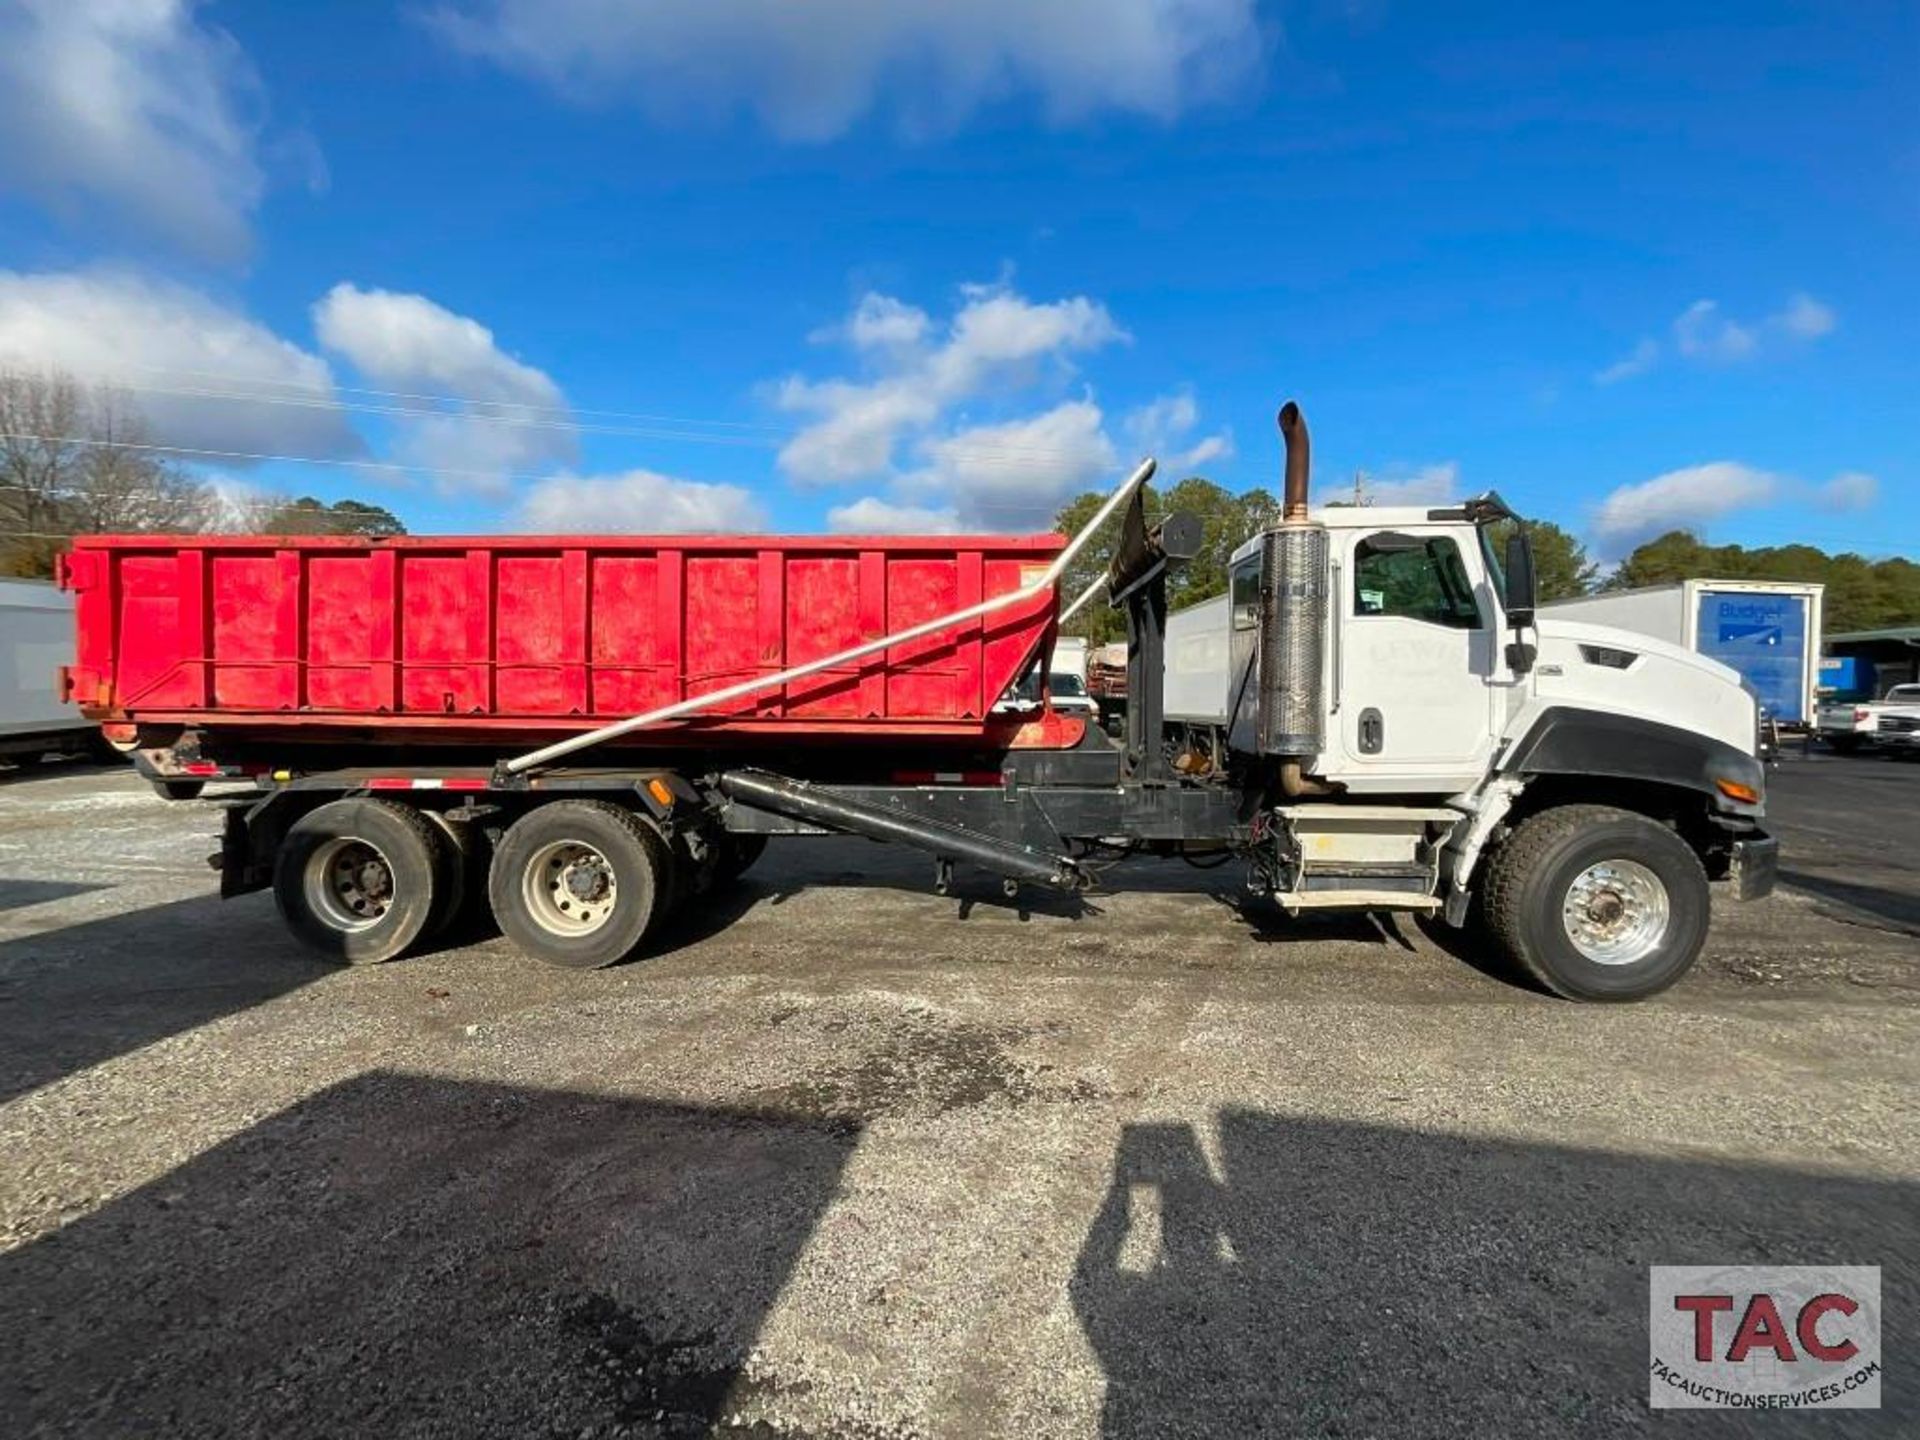 2012 CAT CT660S Roll-Off Truck W/ 20yd Dumpster - Image 3 of 148